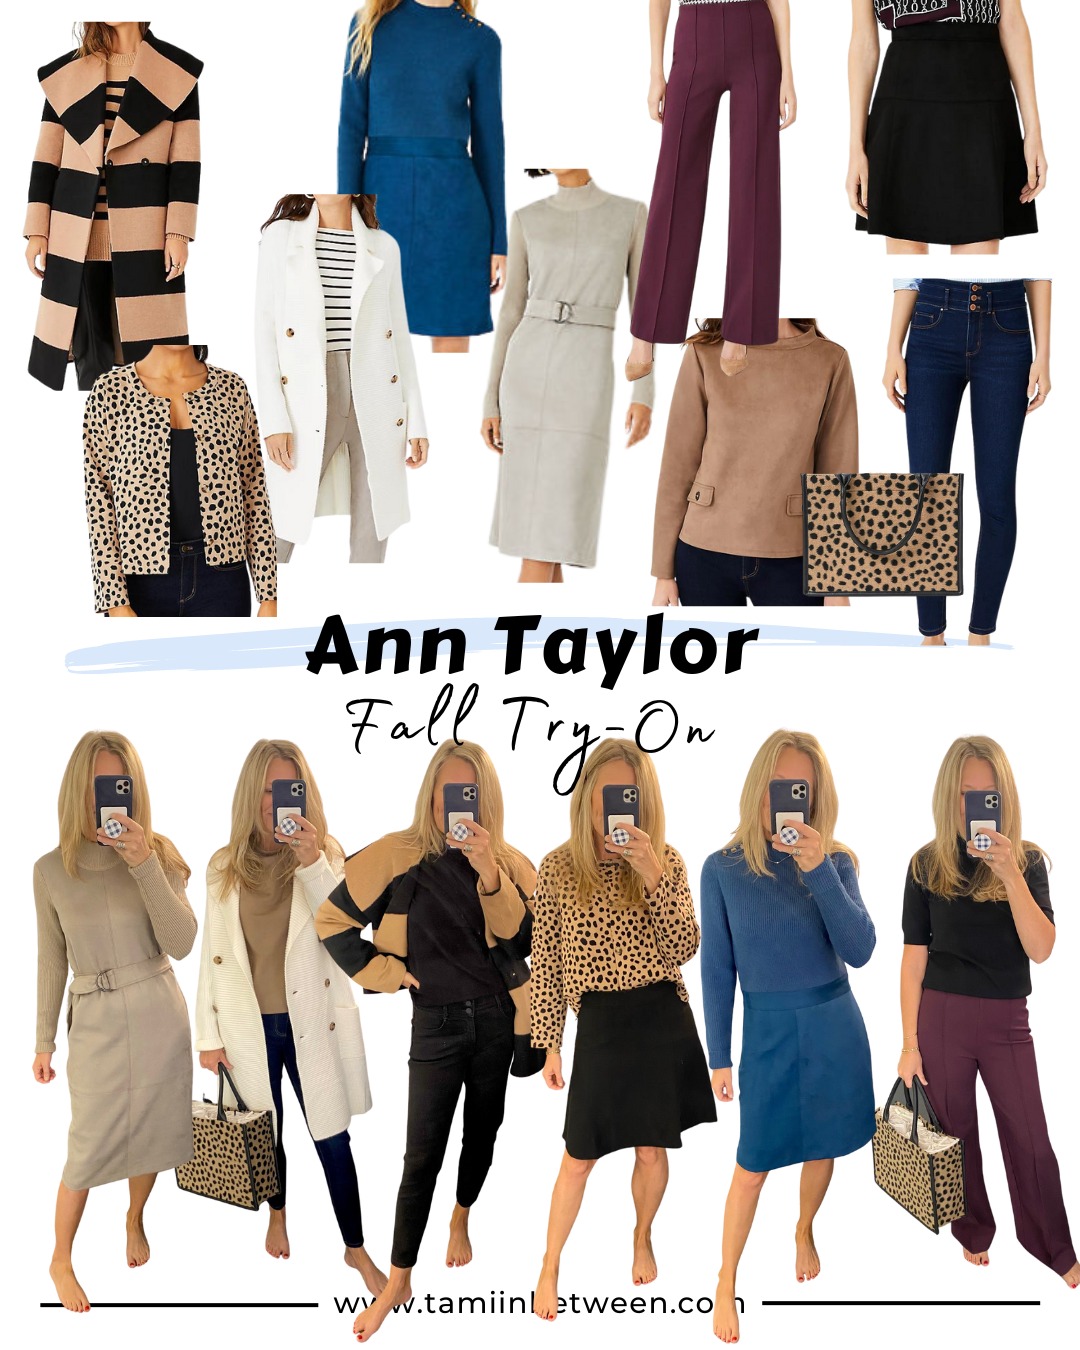 My Favorite Winter Trends from Ann Taylor – Skirt The Rules